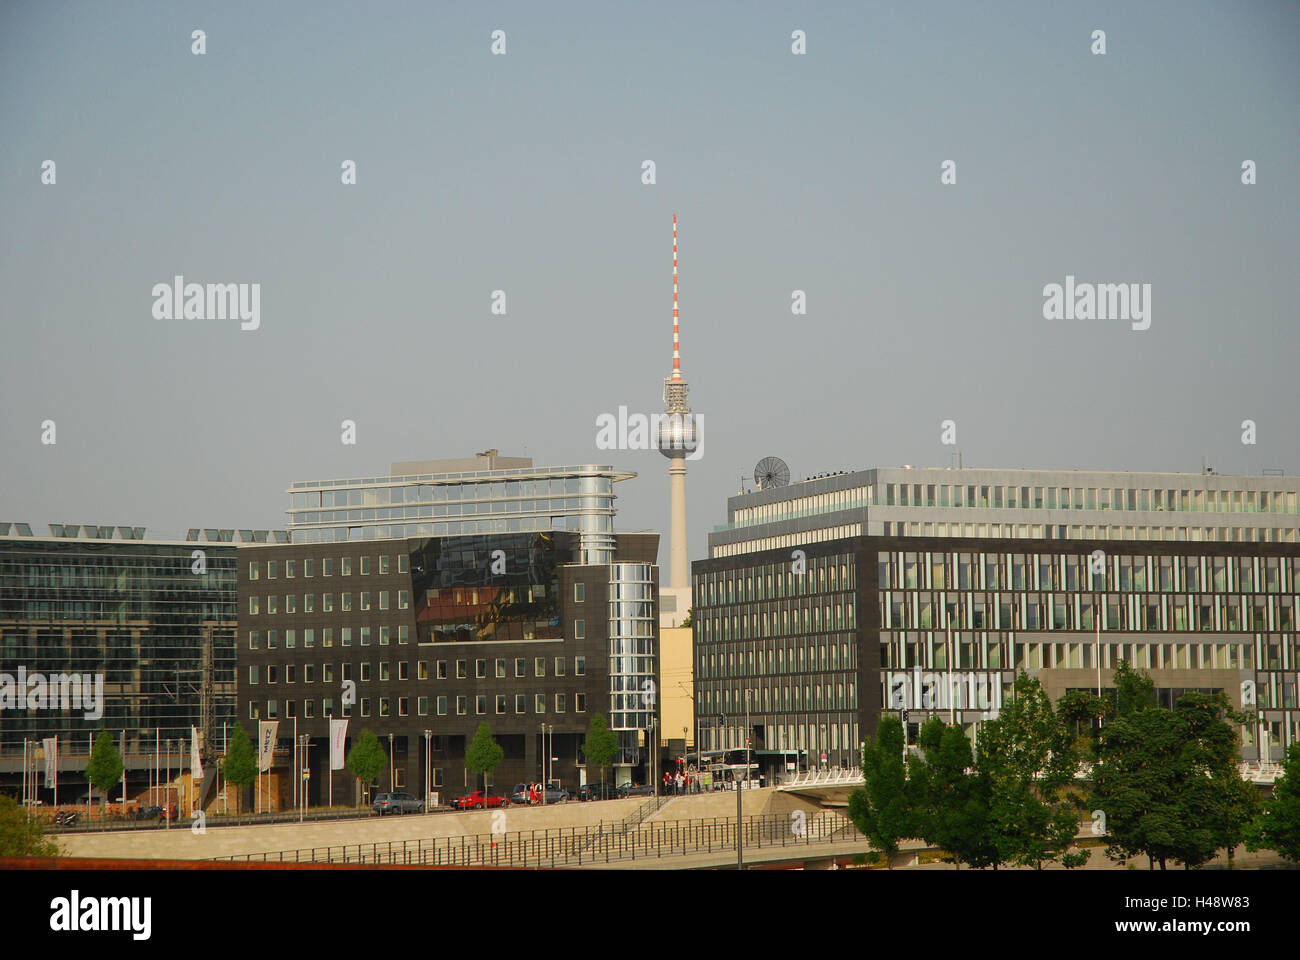 Germany, Berlin, Spree bow, building, facades, television tower, town, capital, Berlin middle, government district, Spree shore, house facades, architecture, glass fronts, tower, administration building, place of interest, Stock Photo